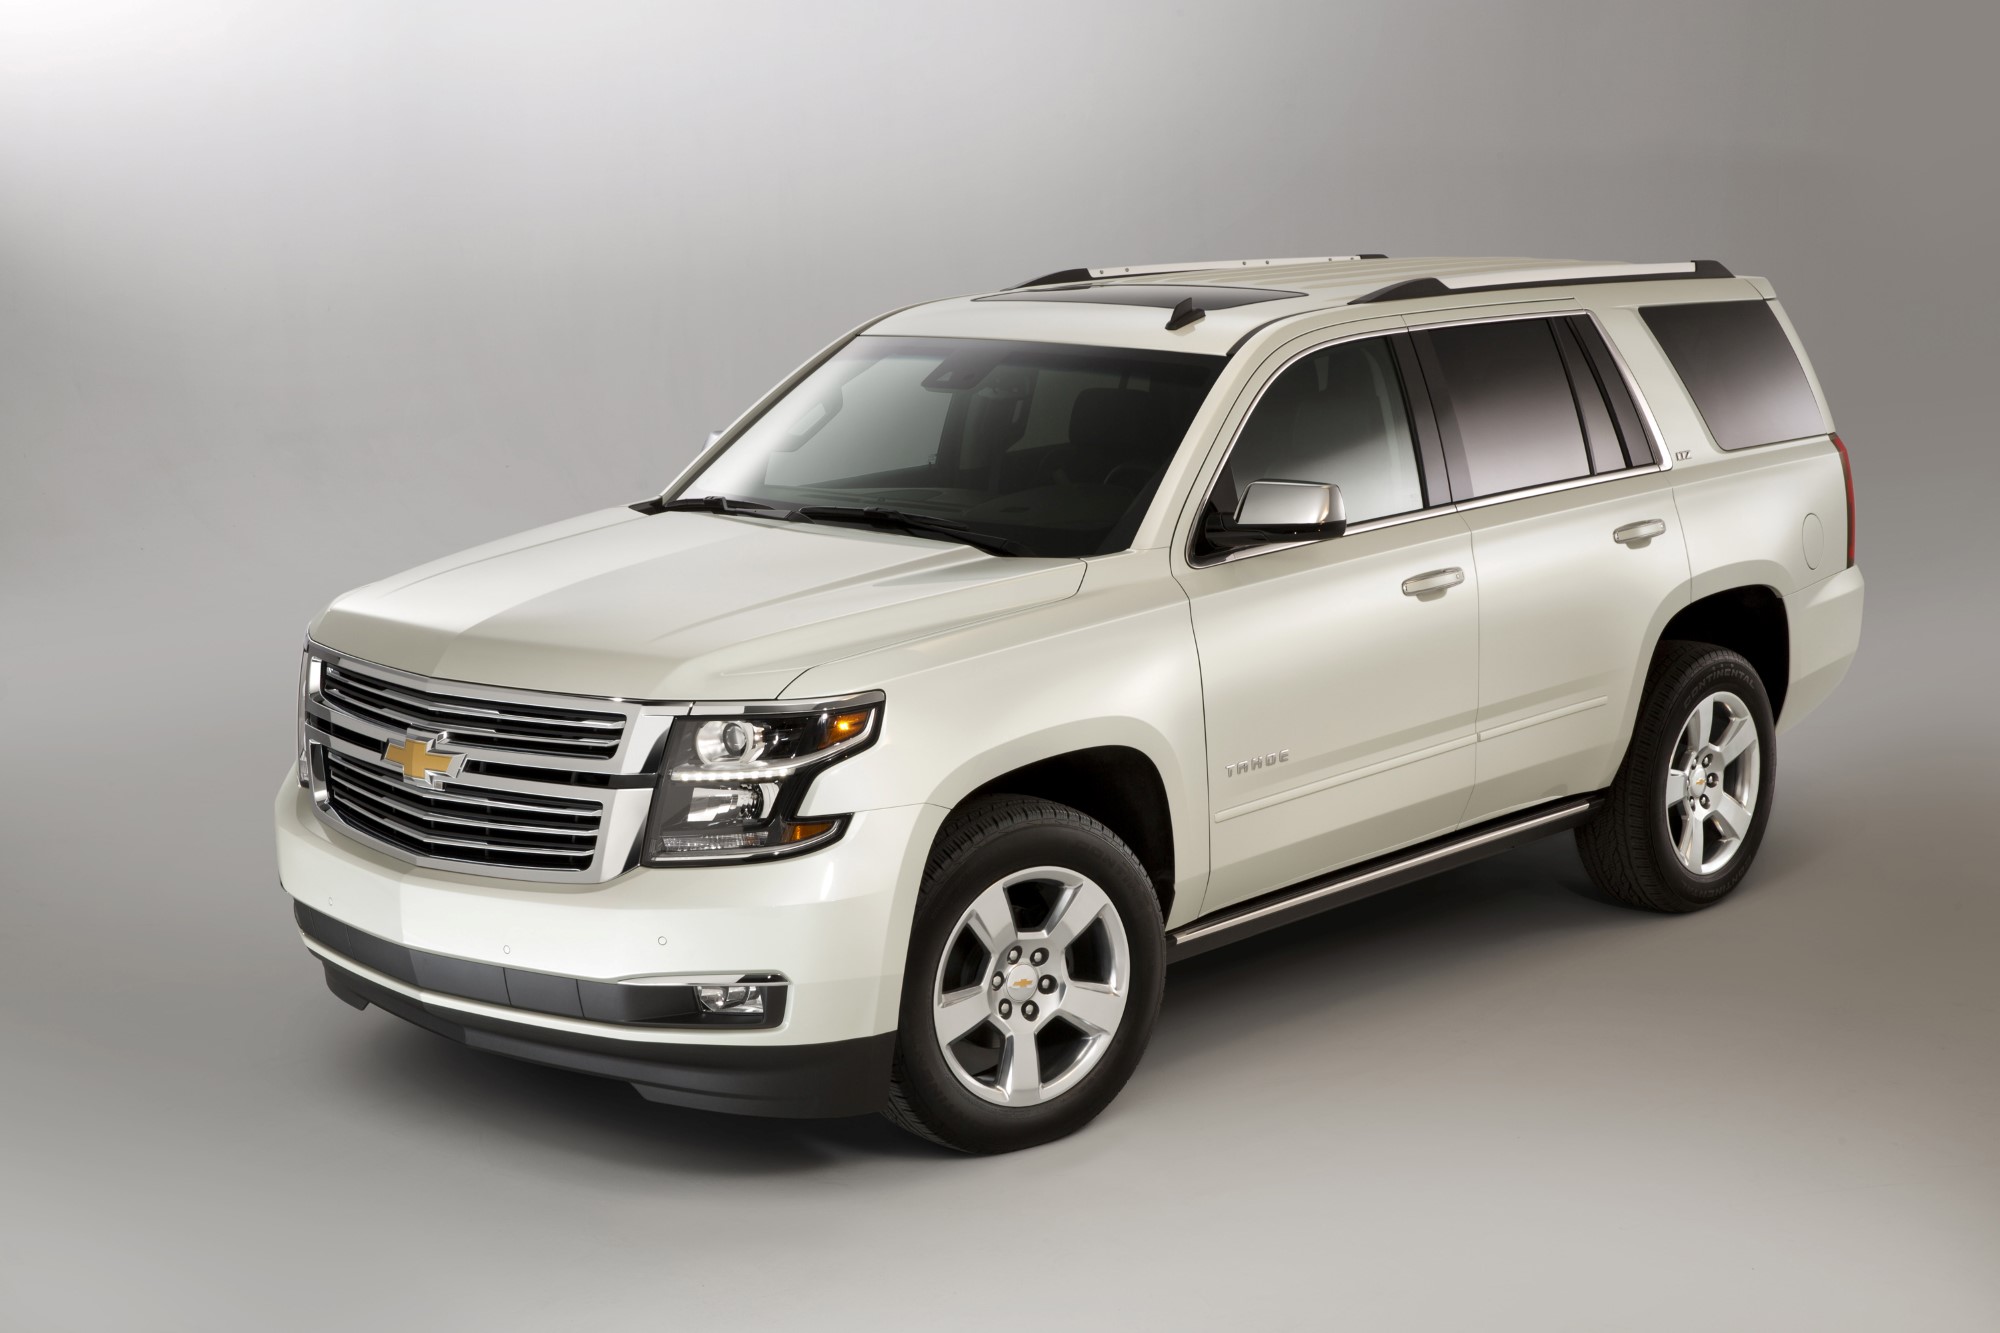 2015 Chevrolet Tahoe (Chevy) Review, Ratings, Specs, Prices, and Photos